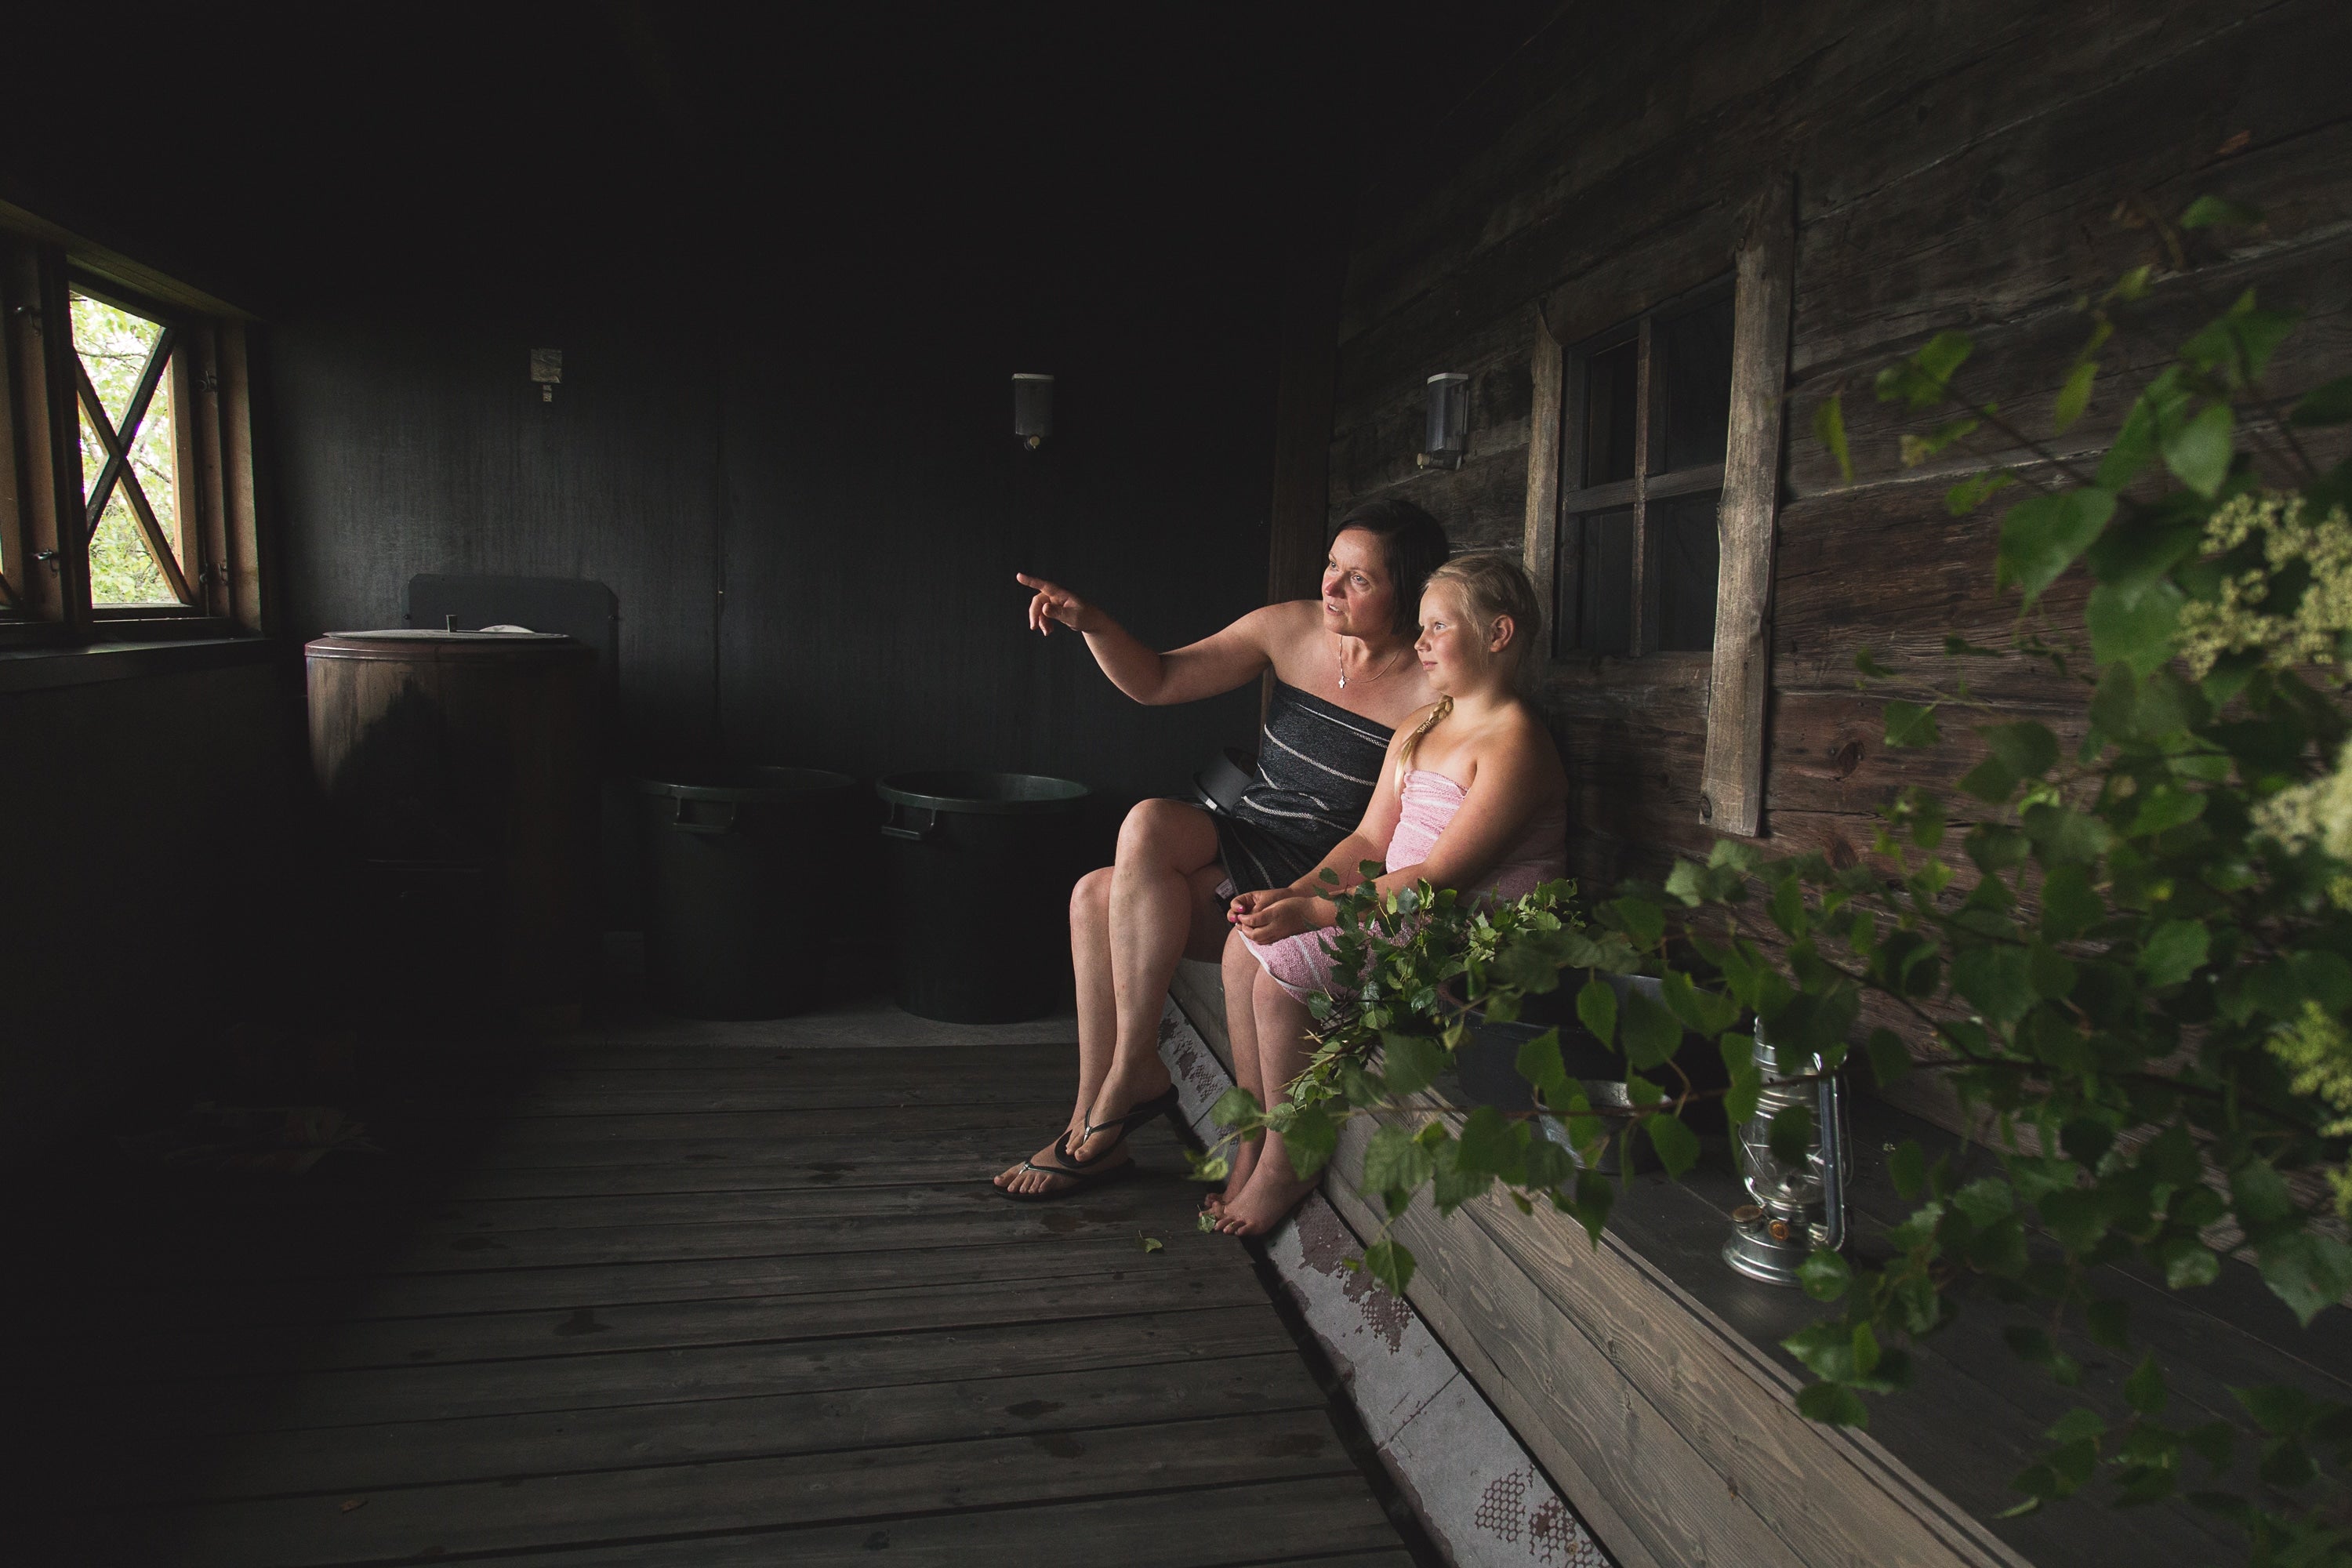 mother and daughter in sauna